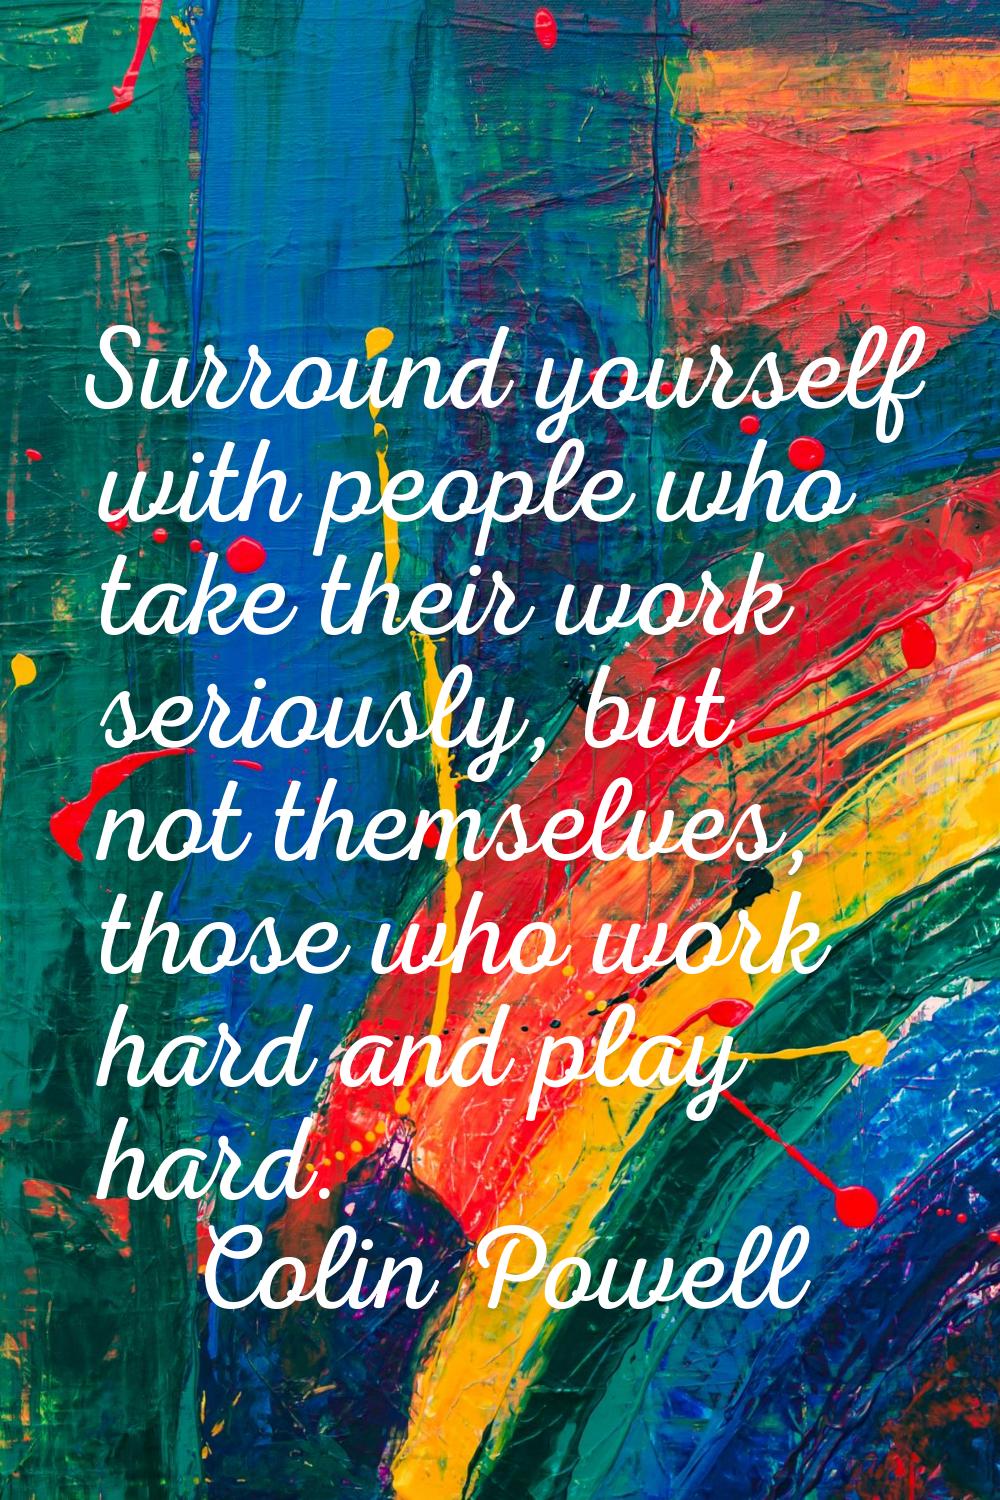 Surround yourself with people who take their work seriously, but not themselves, those who work har